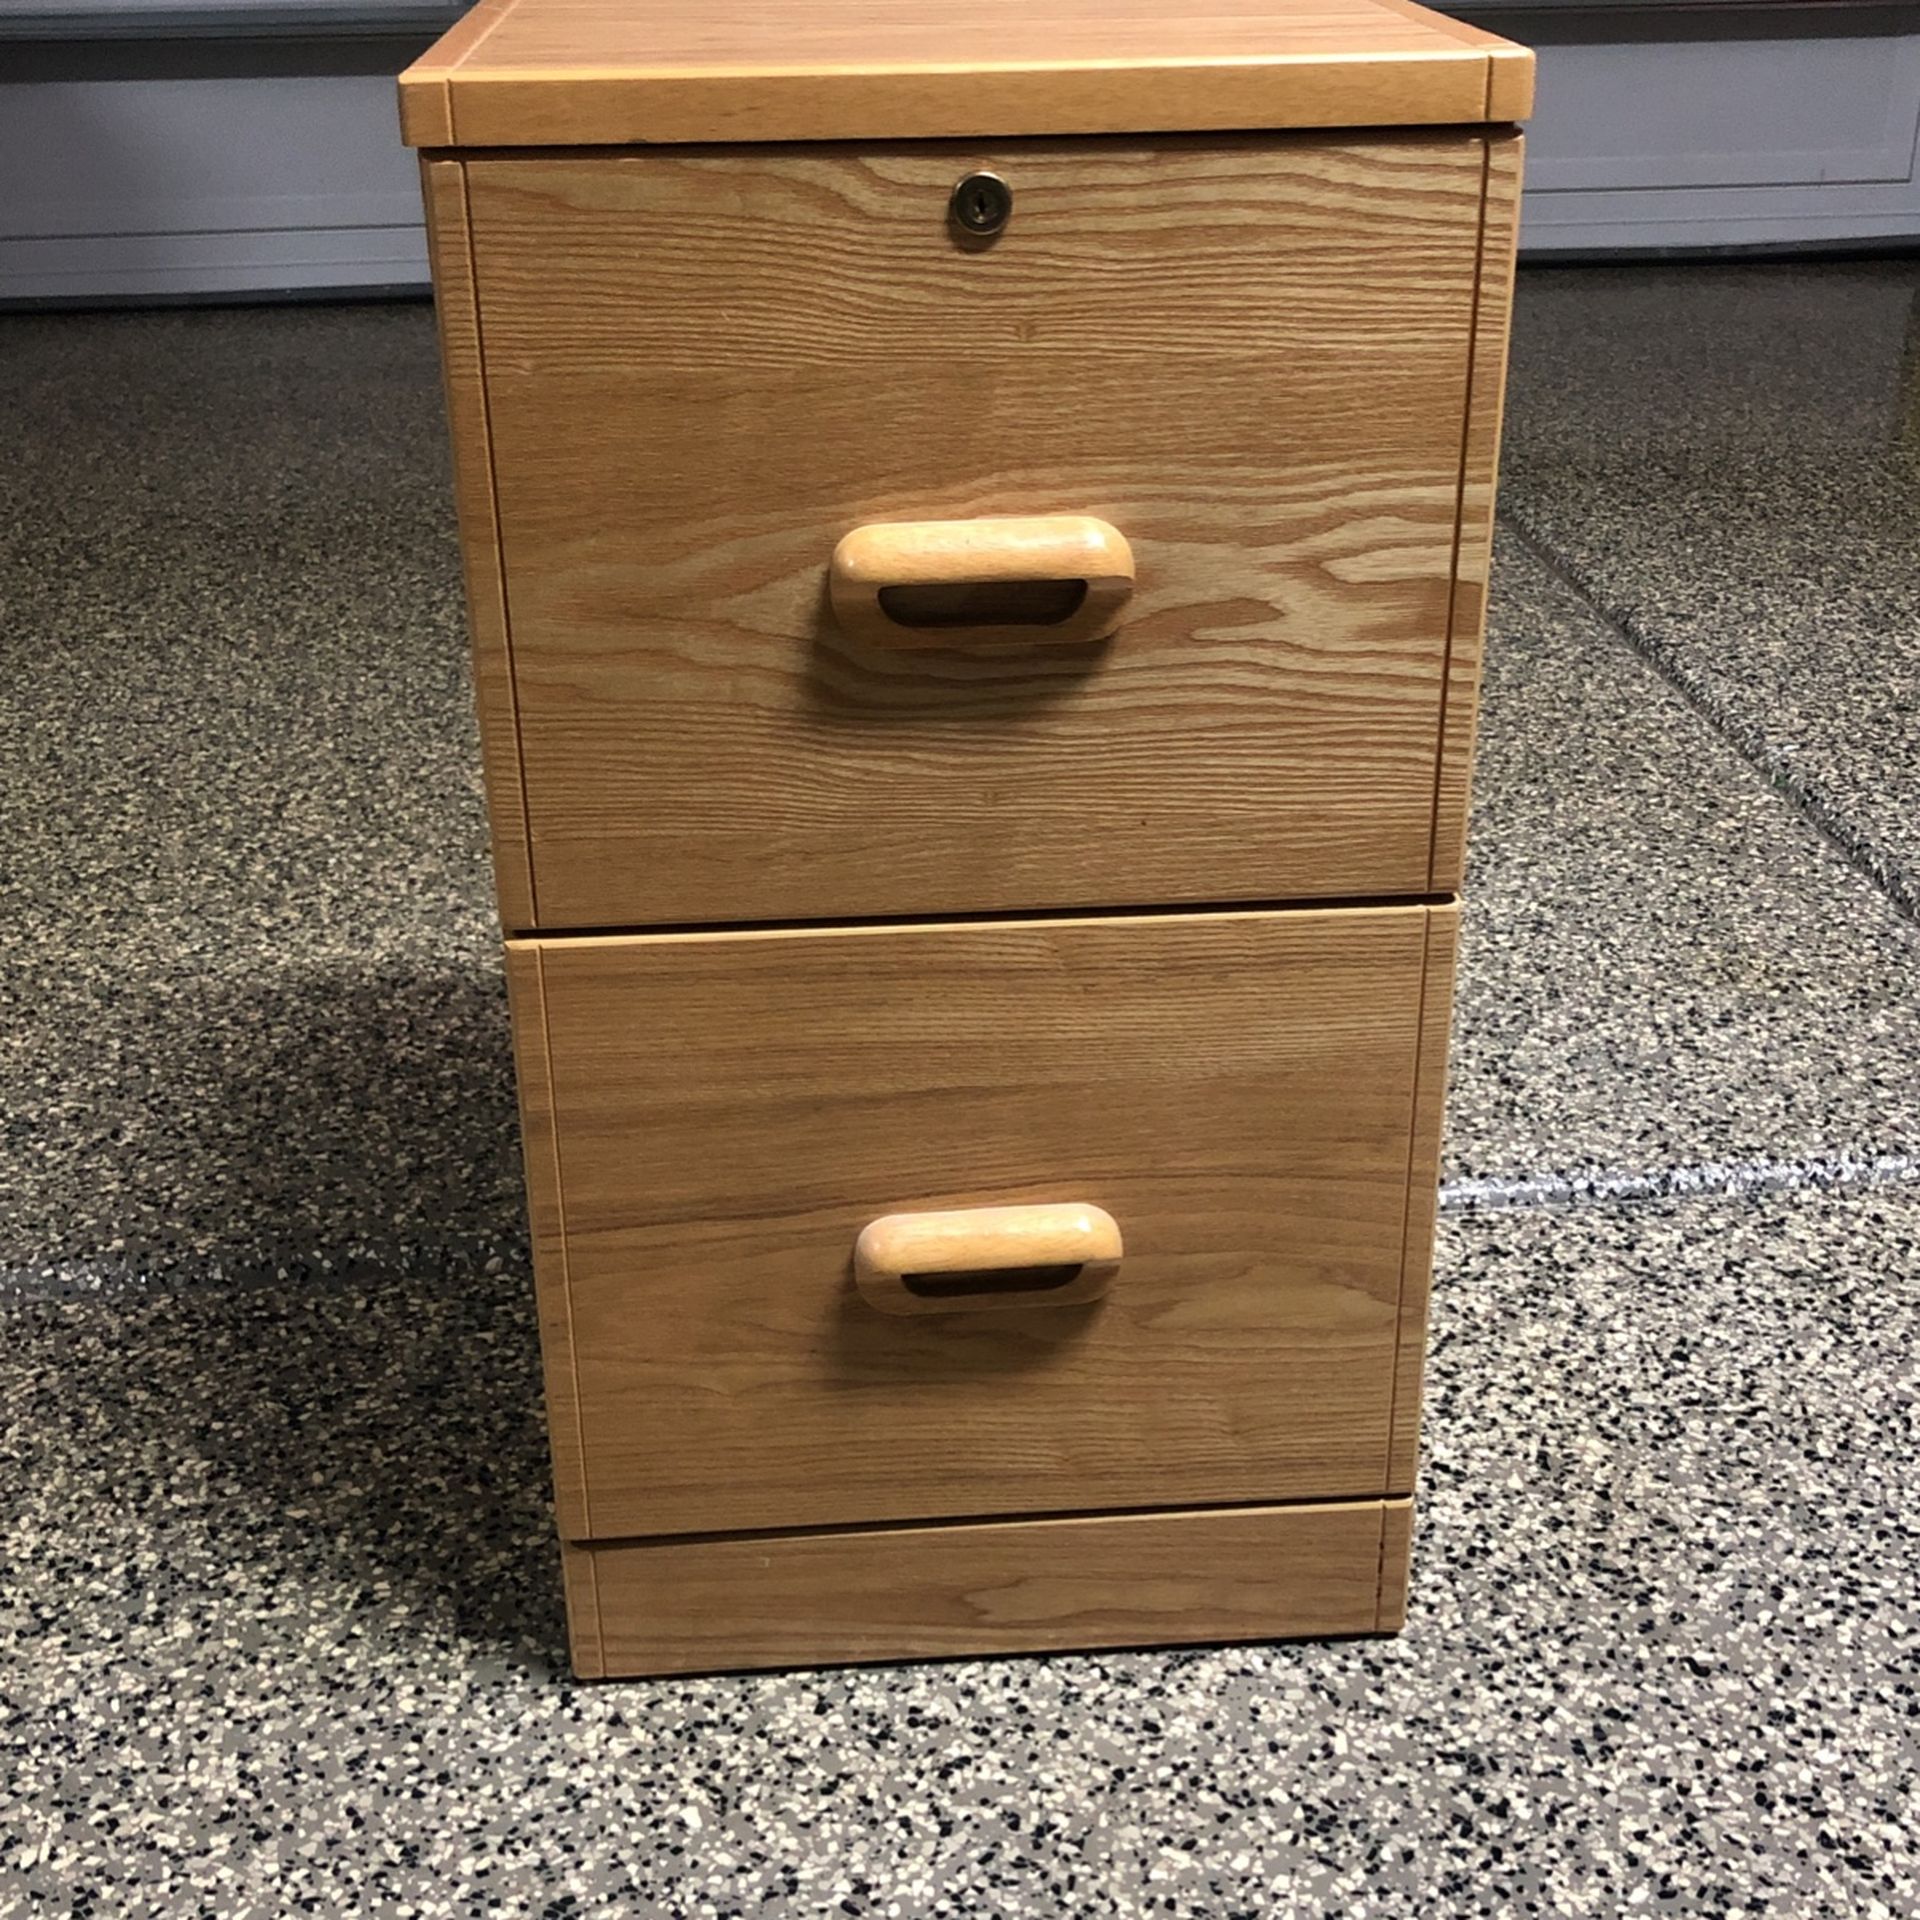 Wooden File Cabinet $5